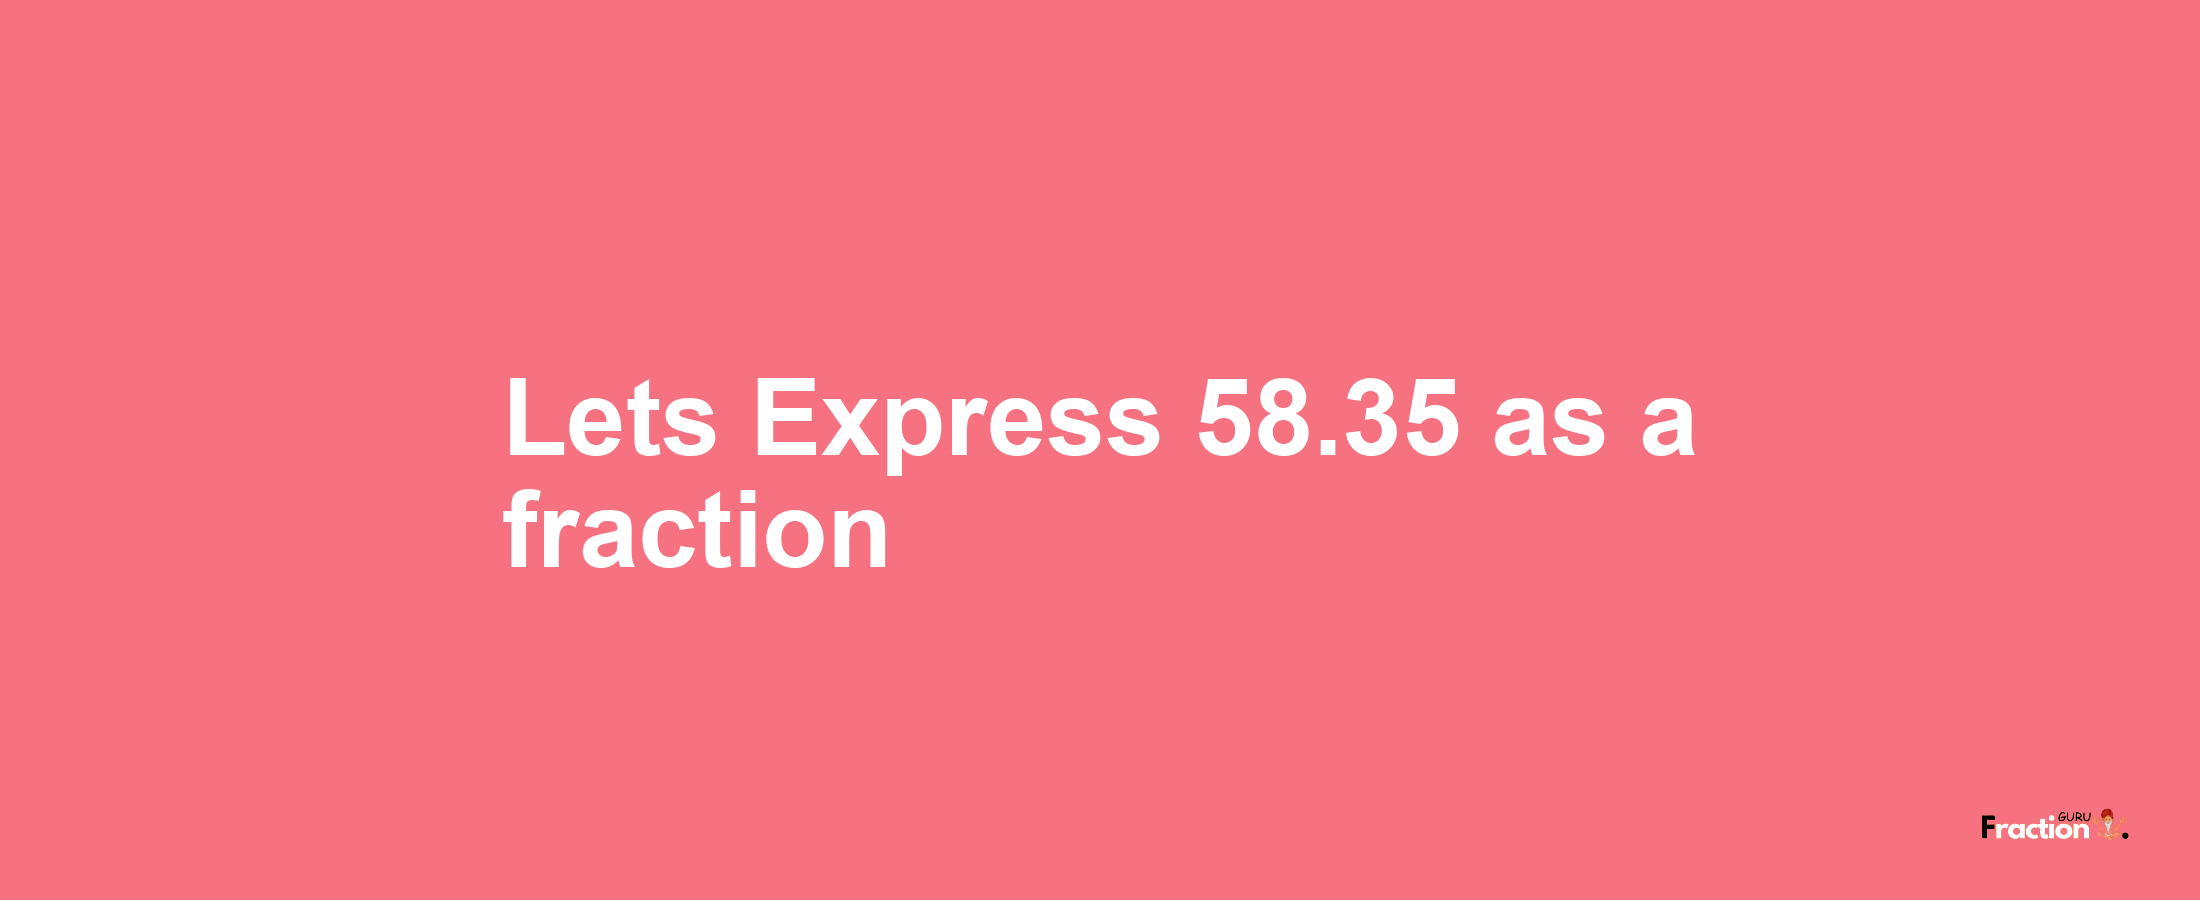 Lets Express 58.35 as afraction